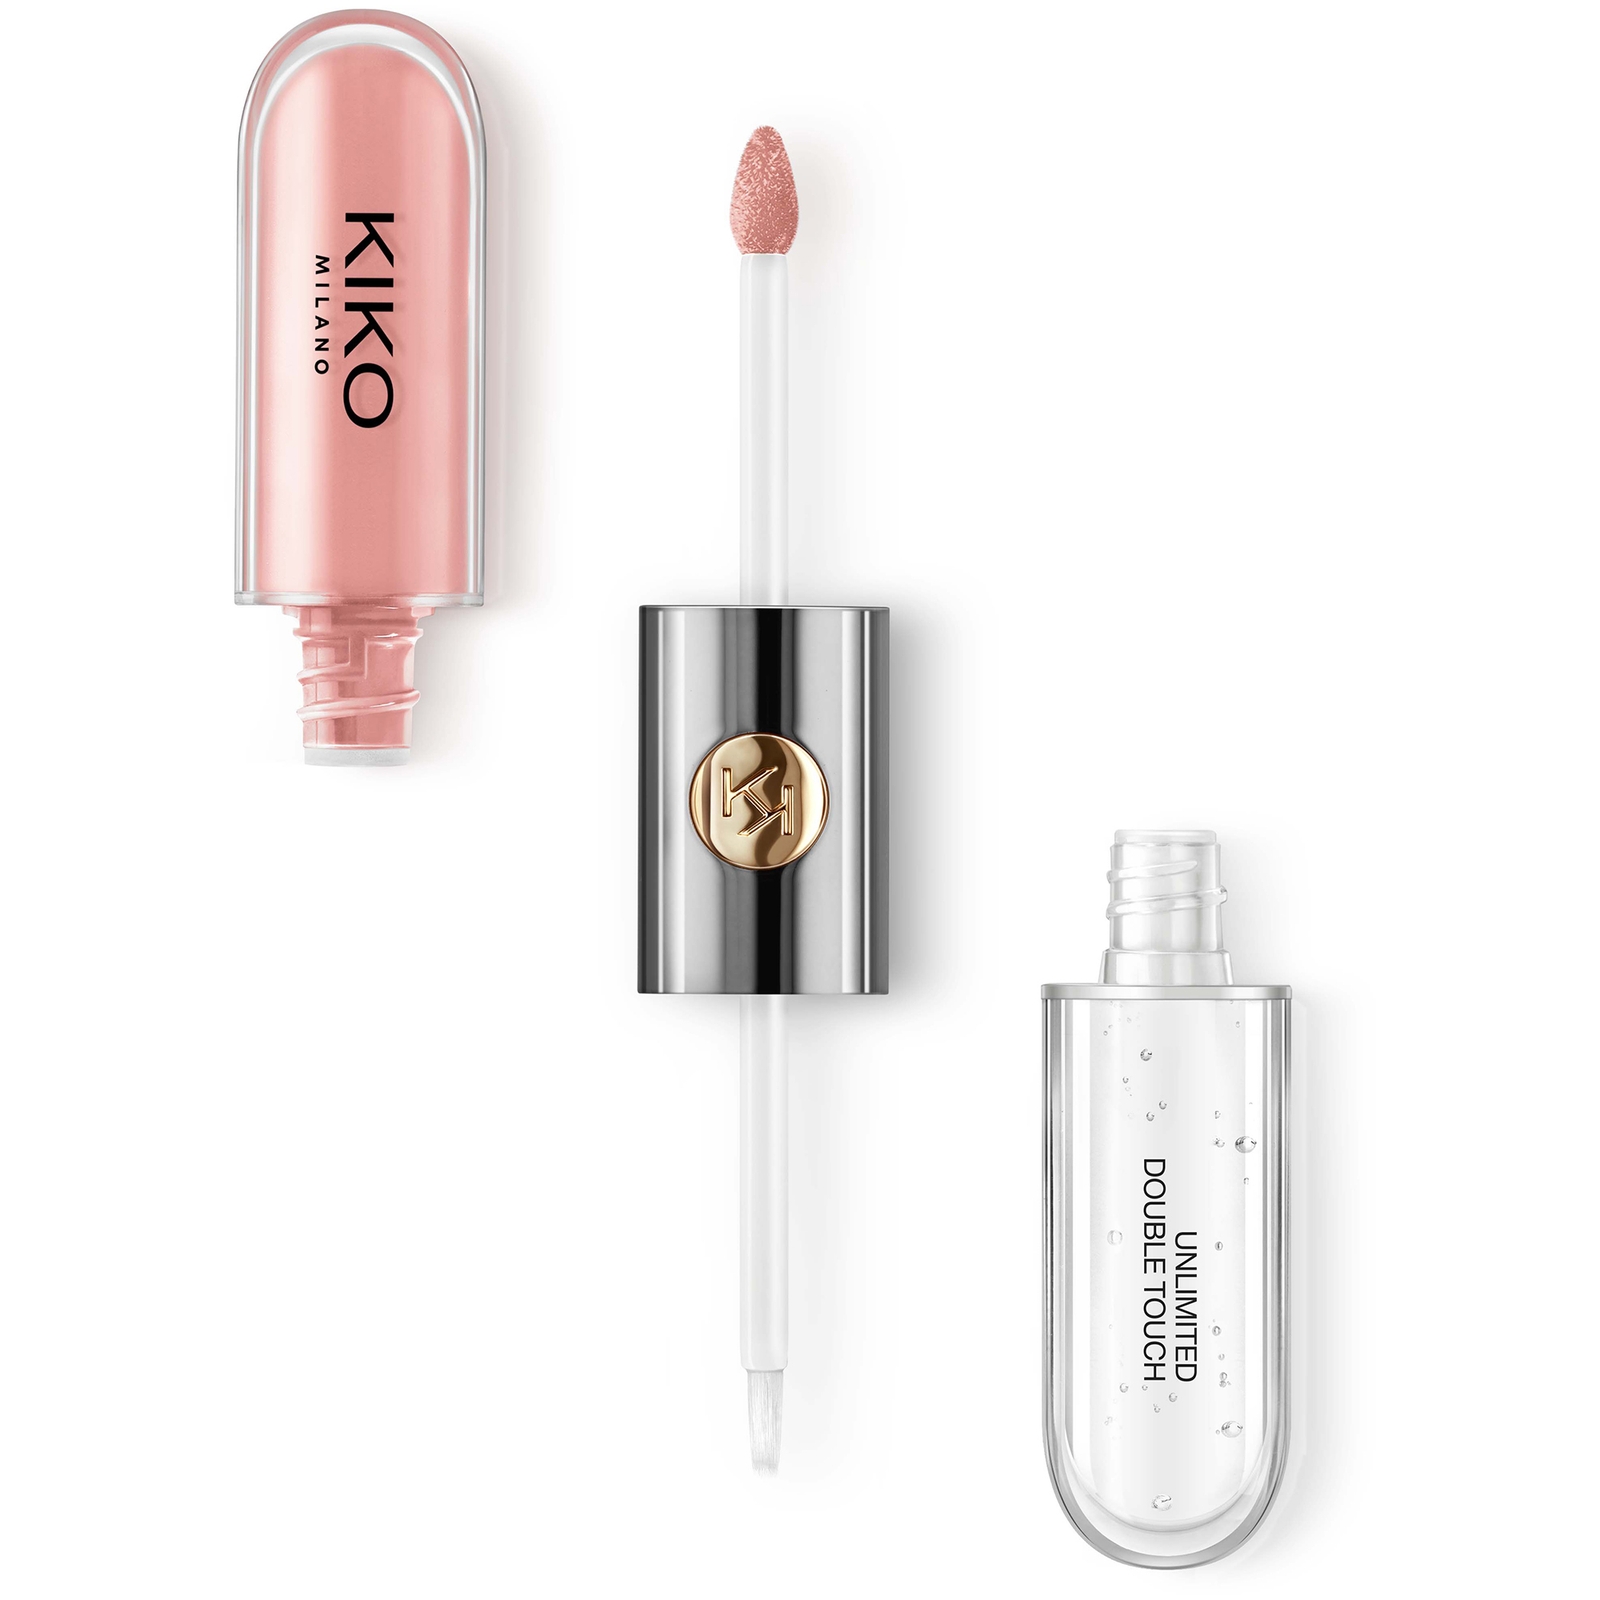 KIKO Milano Unlimited Double Touch 6ml (Various Shades) - 101 Soft Rose